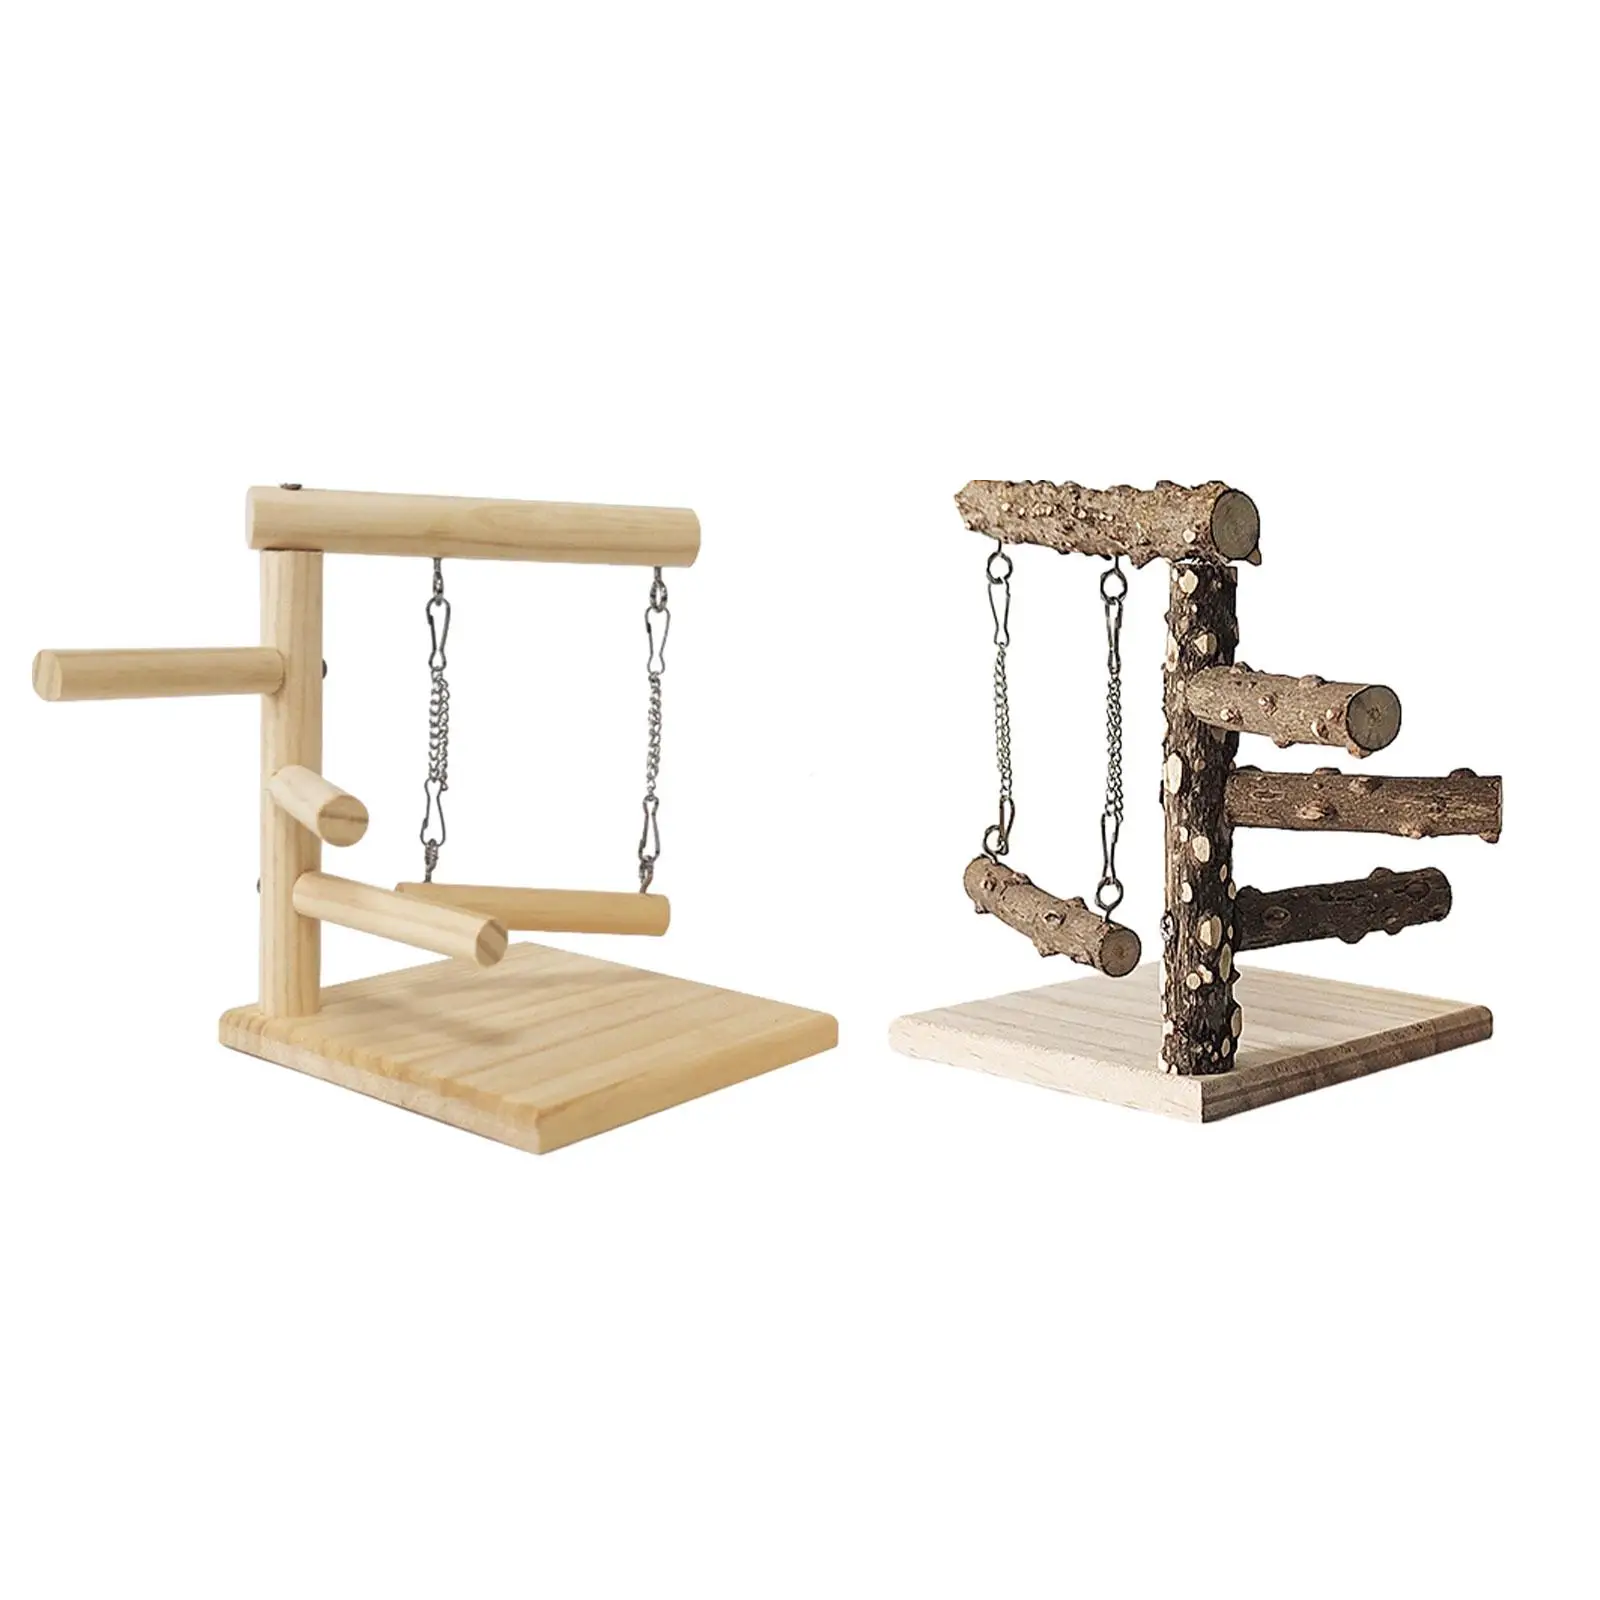 Bird Perch Stand Tabletop Exercise Gym Playground Wooden Perch Playstand Platform for Parrots Lovebirds Cockatiels Canaries